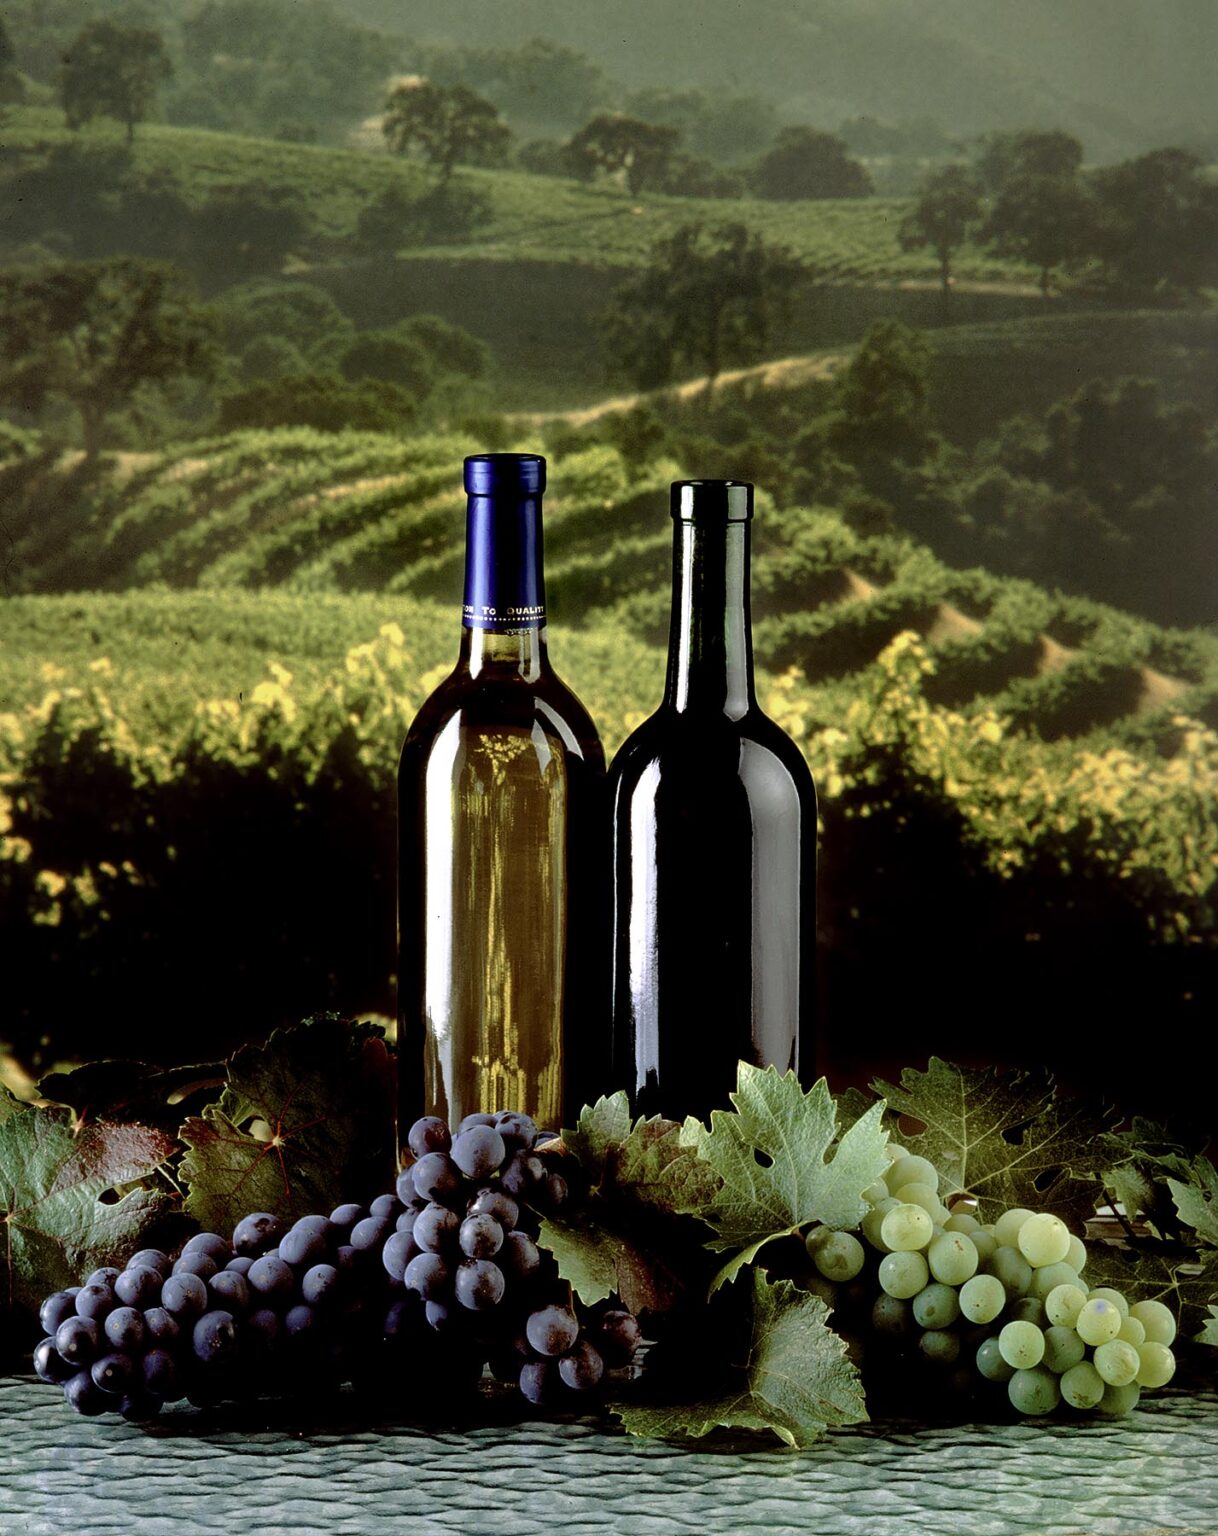 RED and WHITE WINE are one of the west coasts primary agricultural products